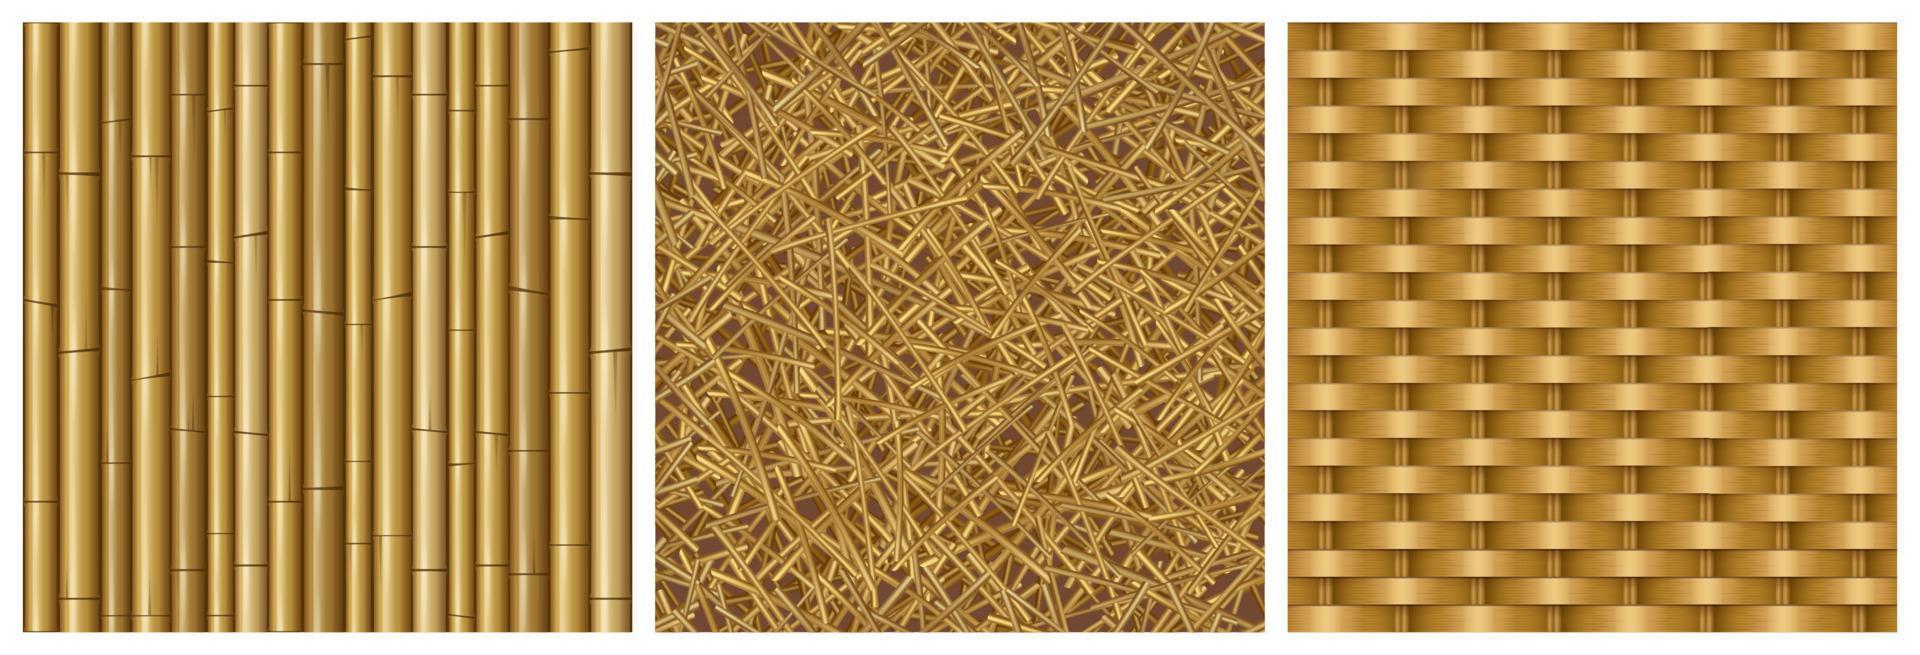 Game textures bamboo stems, straw and wicker set vector